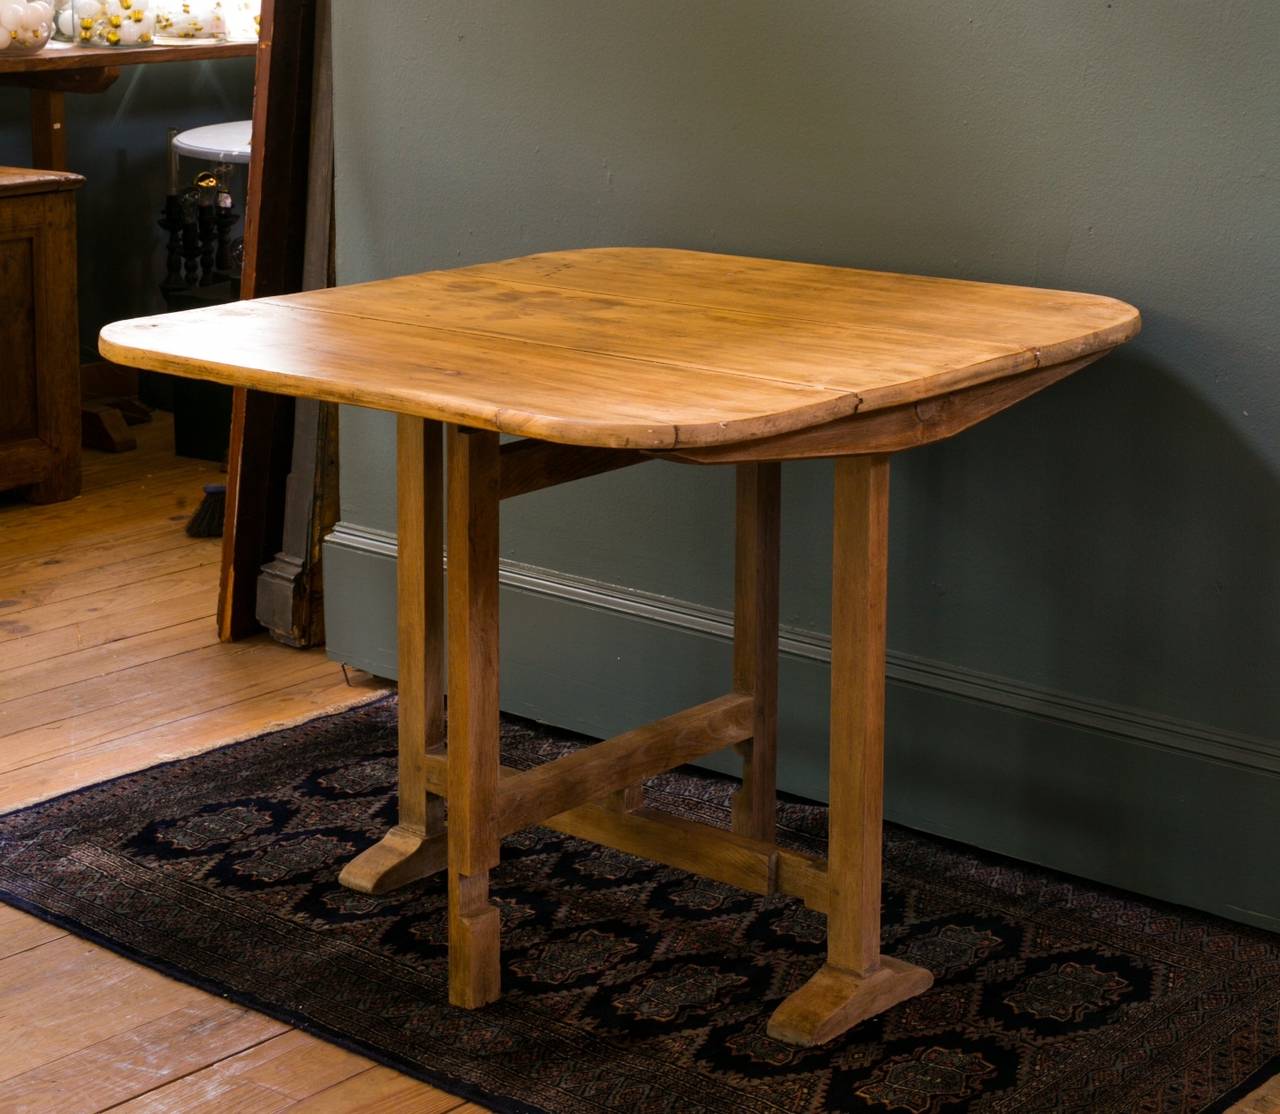 Handmade vintage wooden folding table from France, circa 1920s in working order.